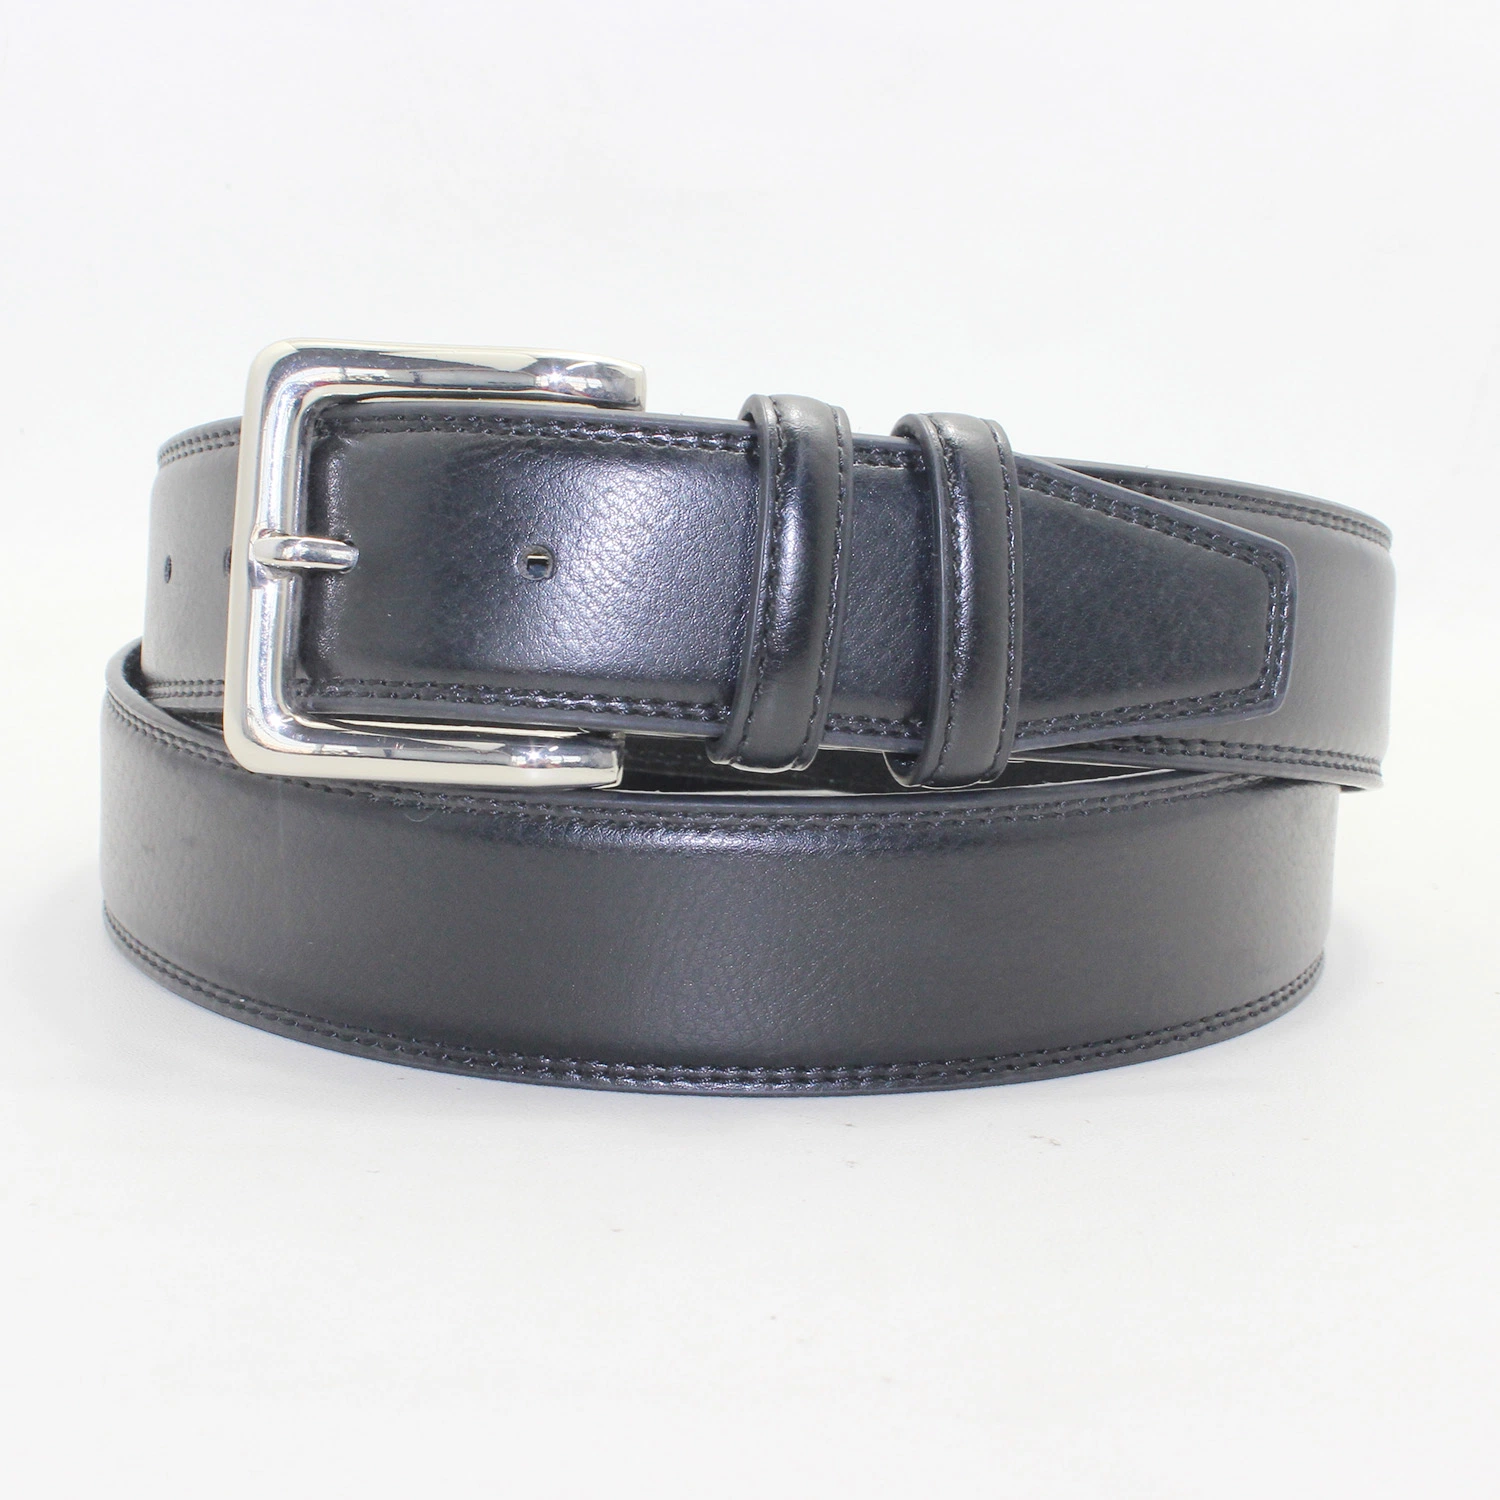 New Belt Collection Fashion Accessories Pepper PU Leather Formal Belt (40-20085)